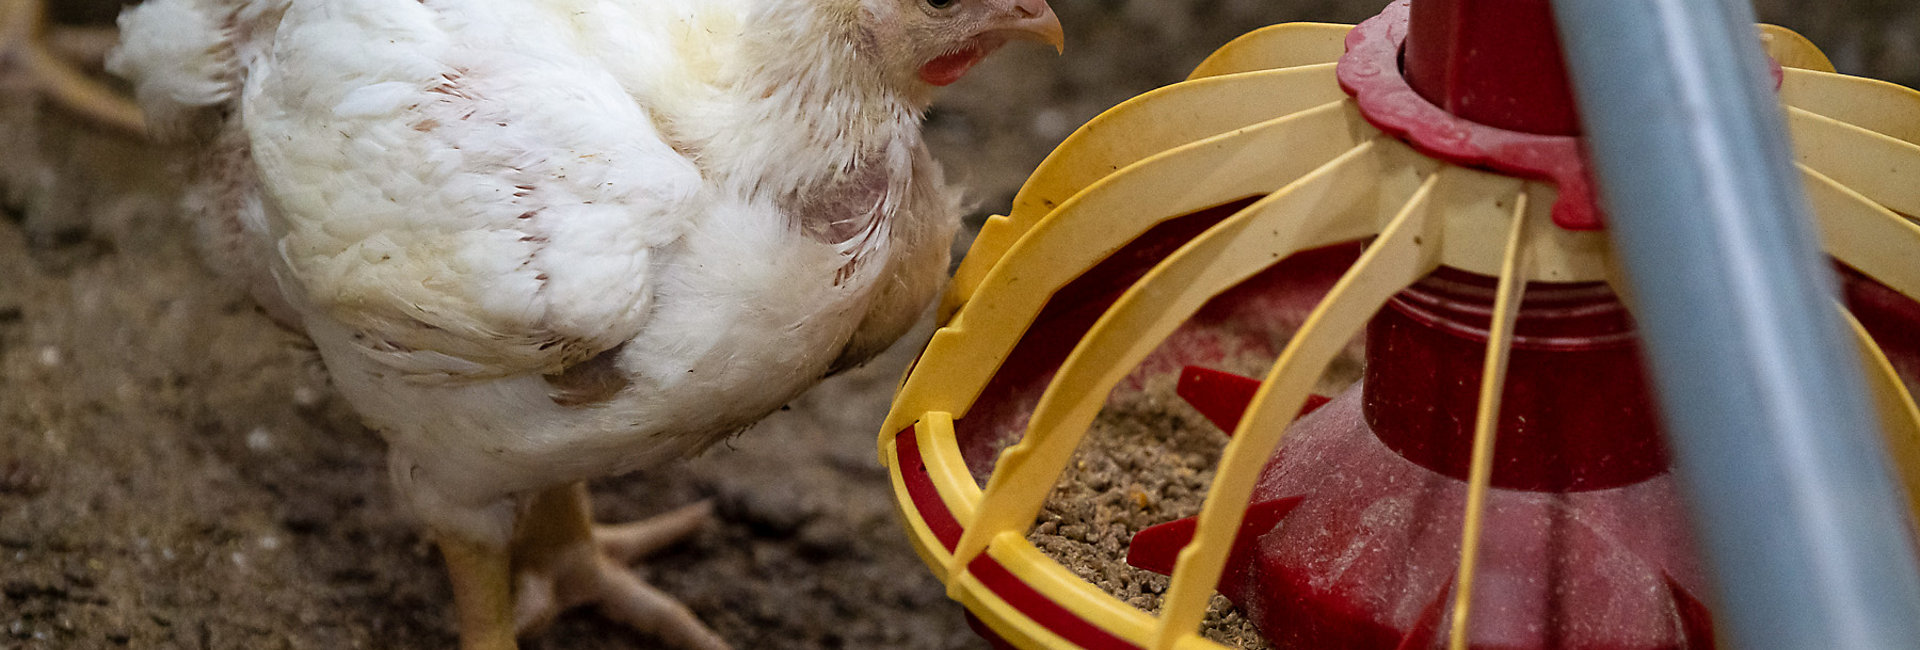 chickens eating automatic feeder grains